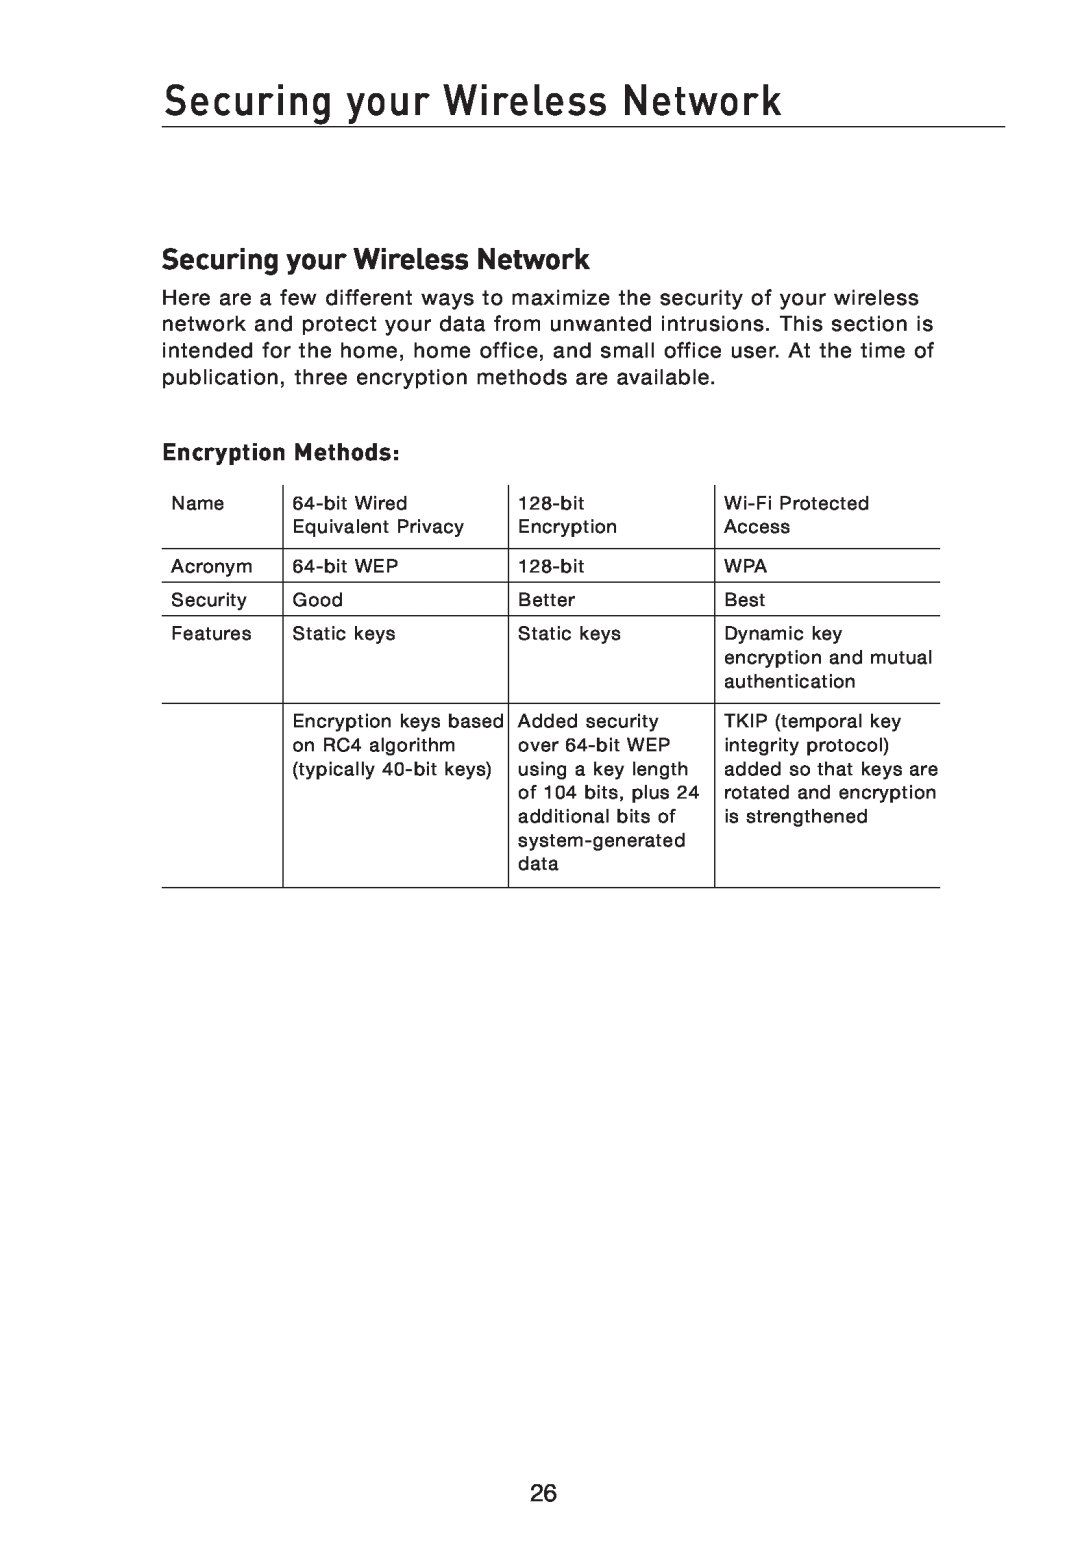 Belkin F5D7051 manual Securing your Wireless Network, Encryption Methods 